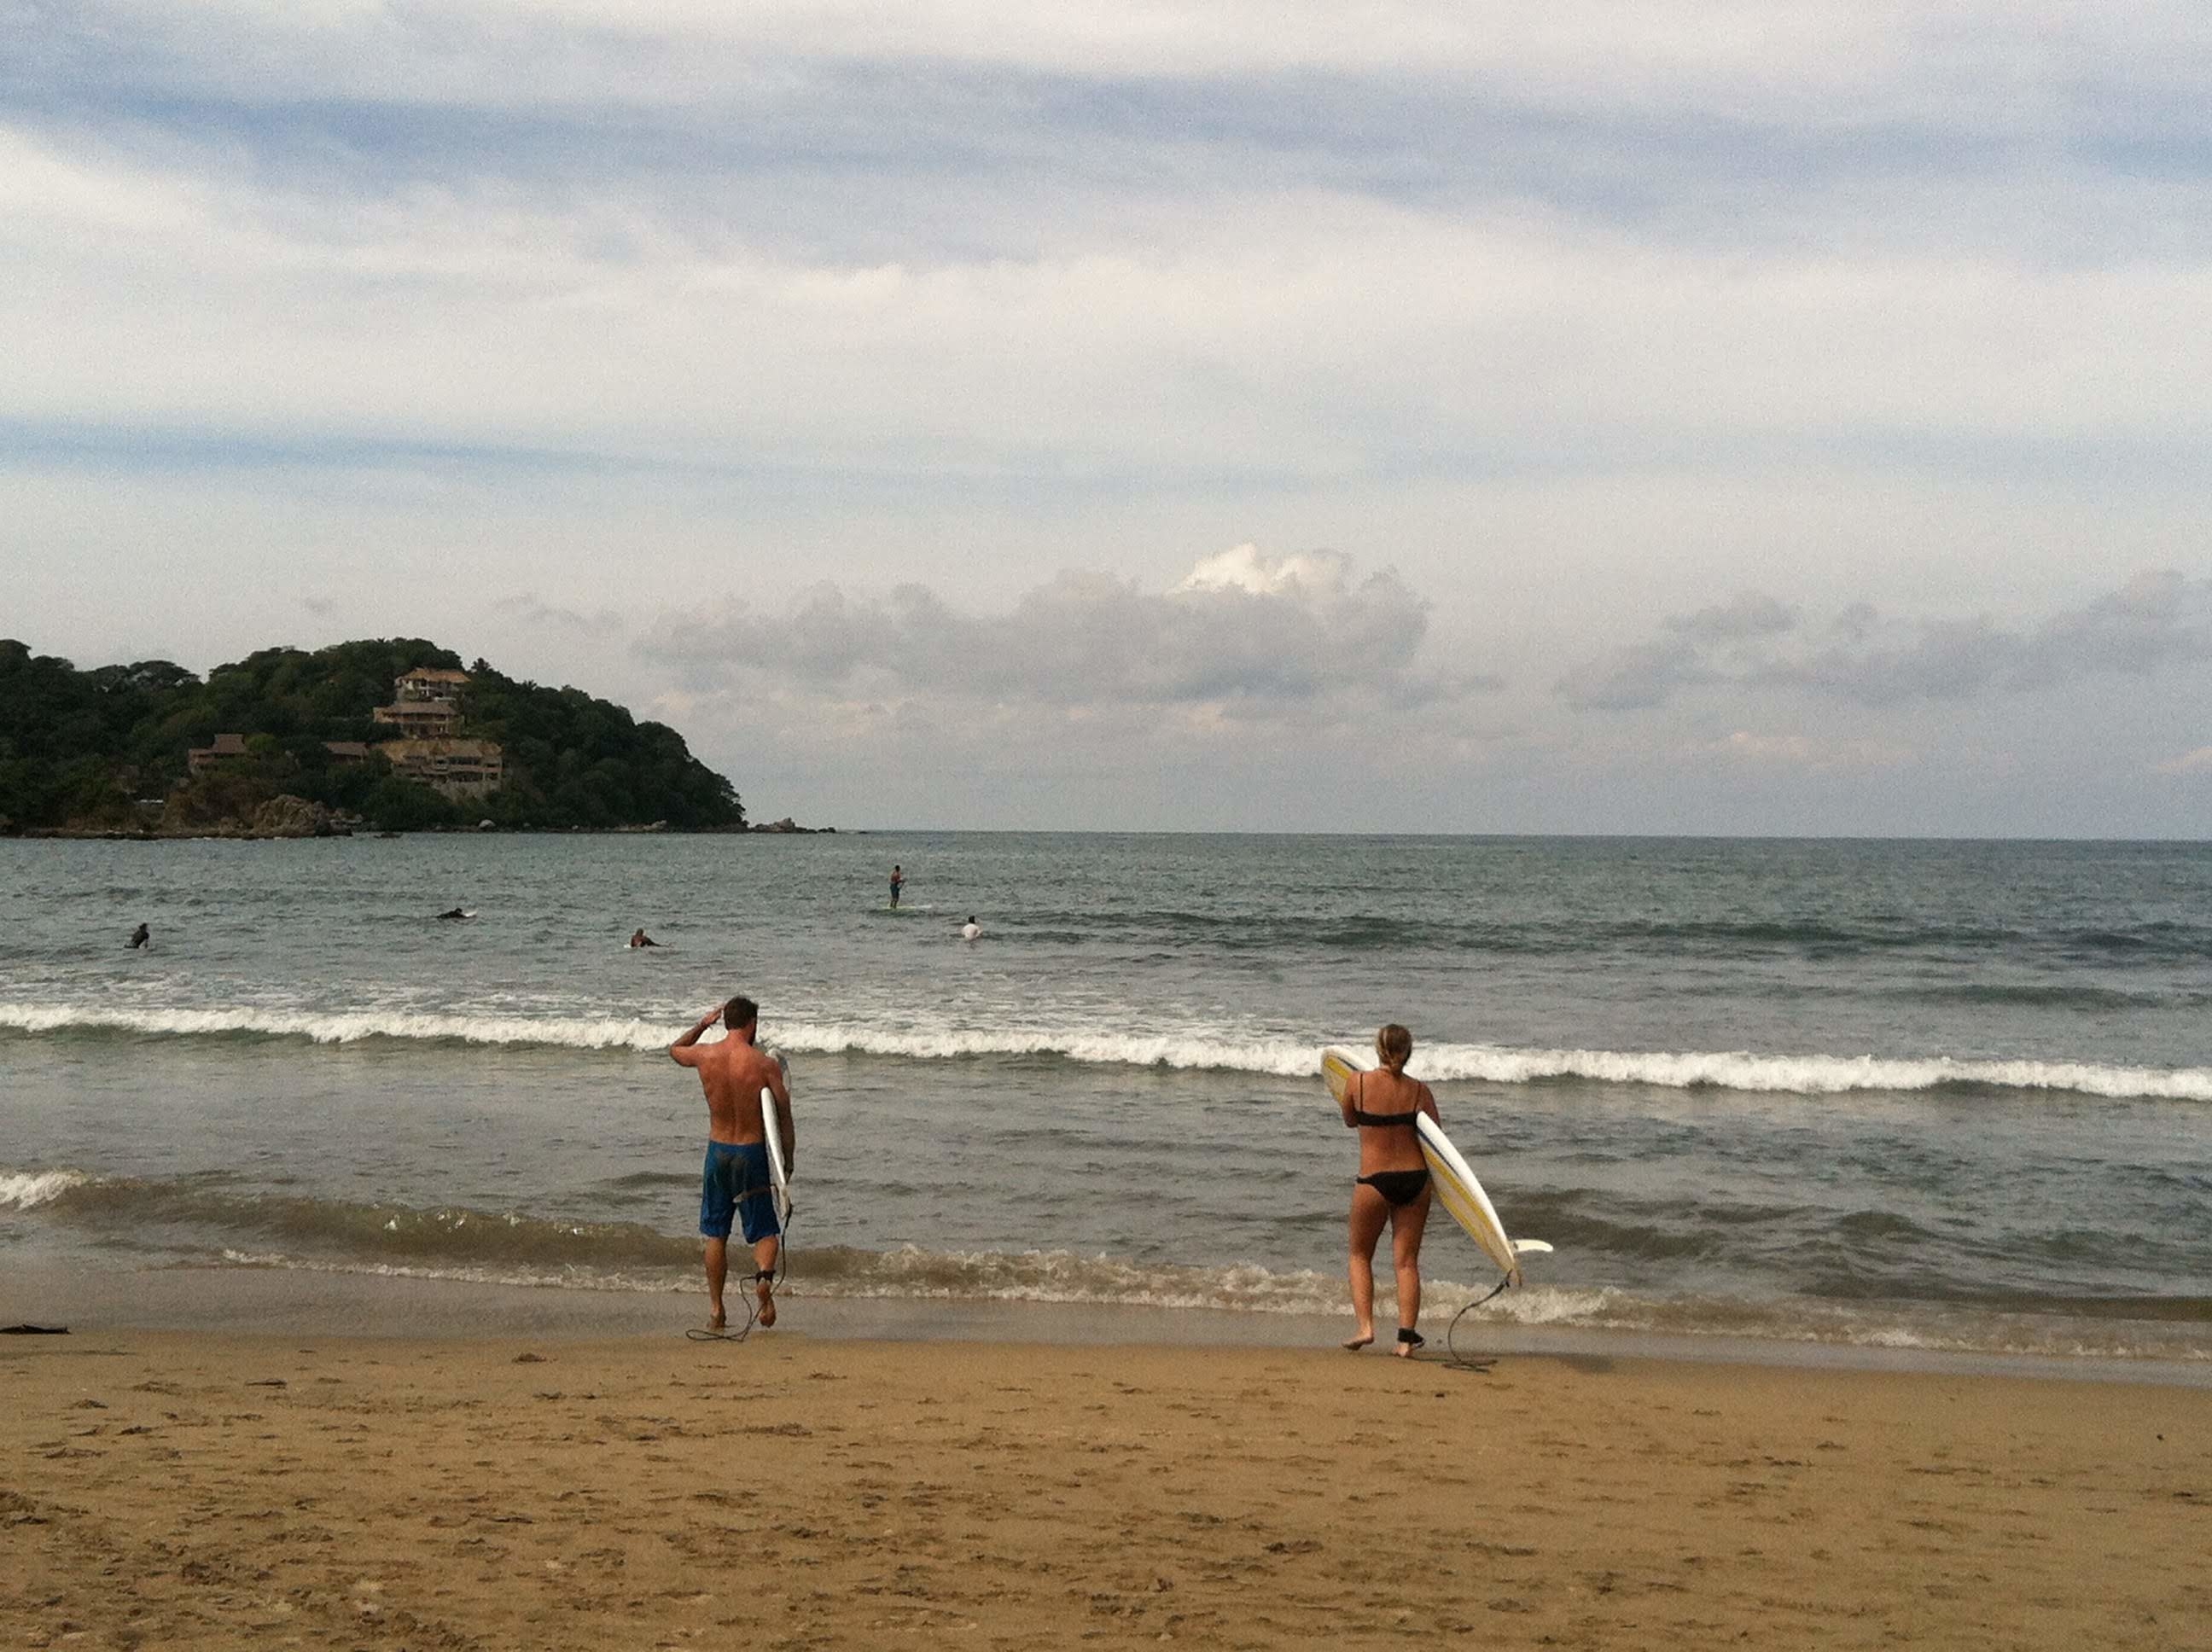 Two people getting ready to go surfing in Sayulita